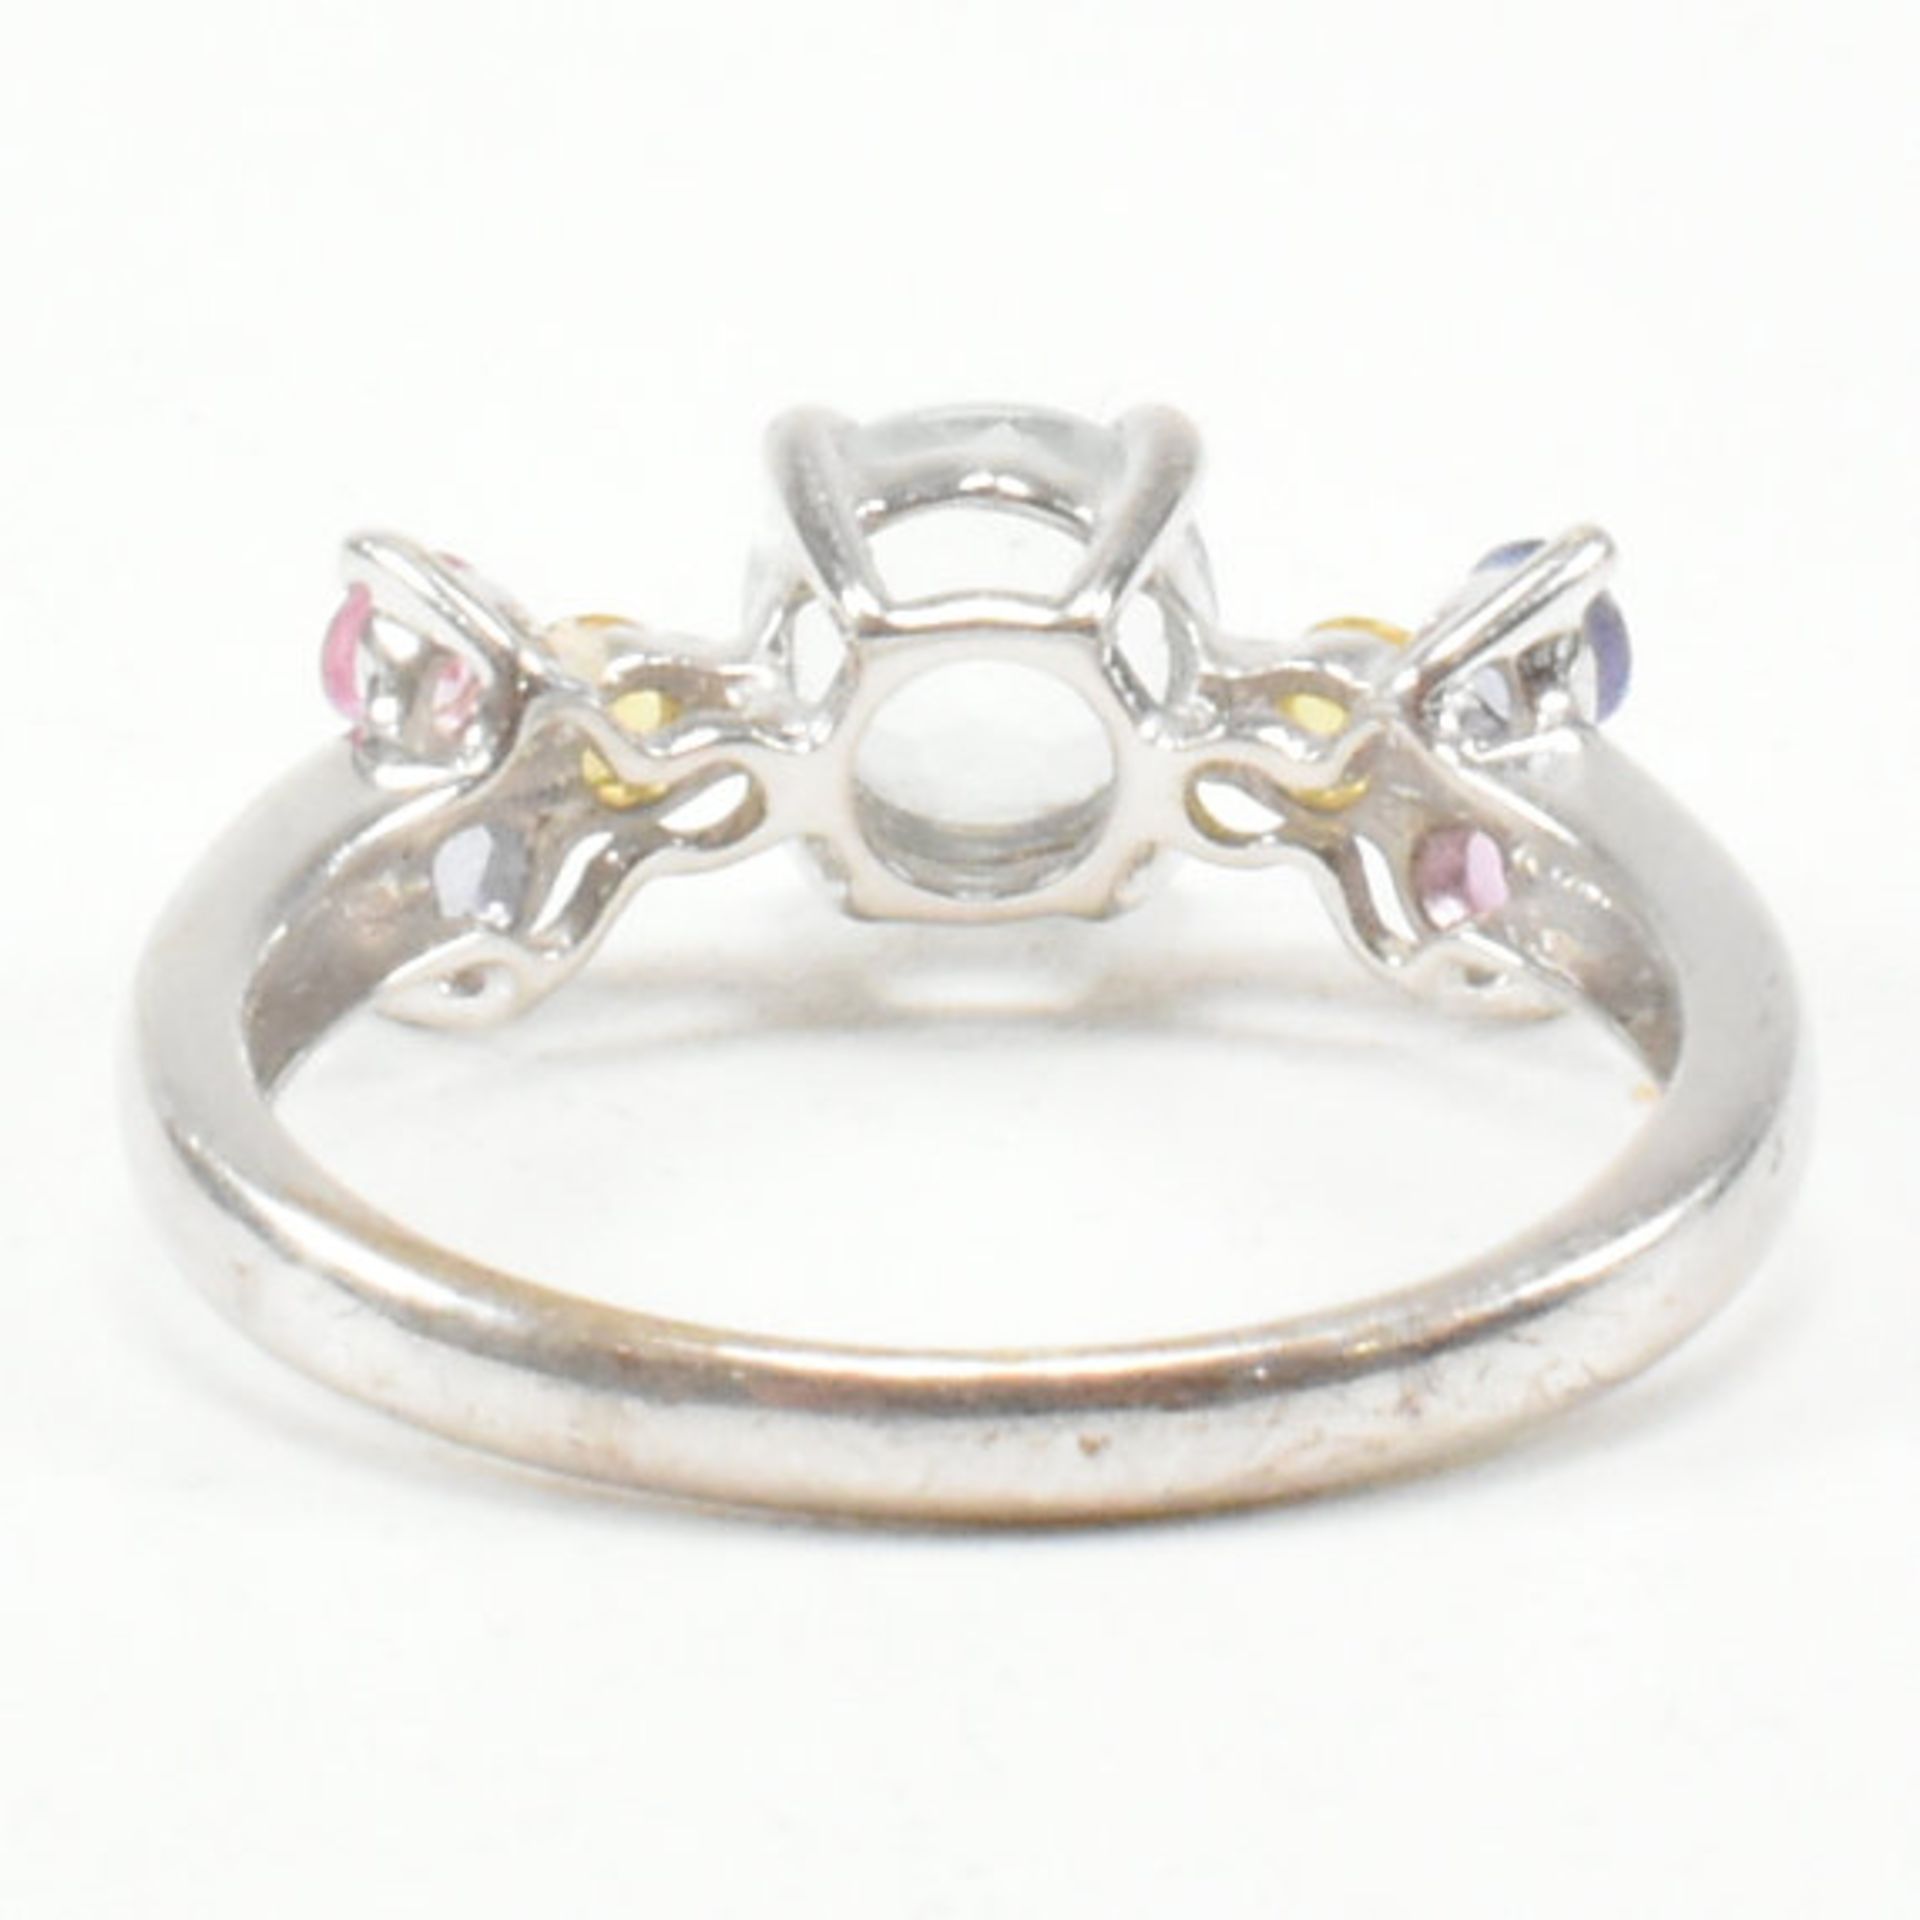 HALLMARKED 9CT WHITE GOLD AQUAMARINE RUBY & SAPPHIRE CLUSTER RING - Image 3 of 6